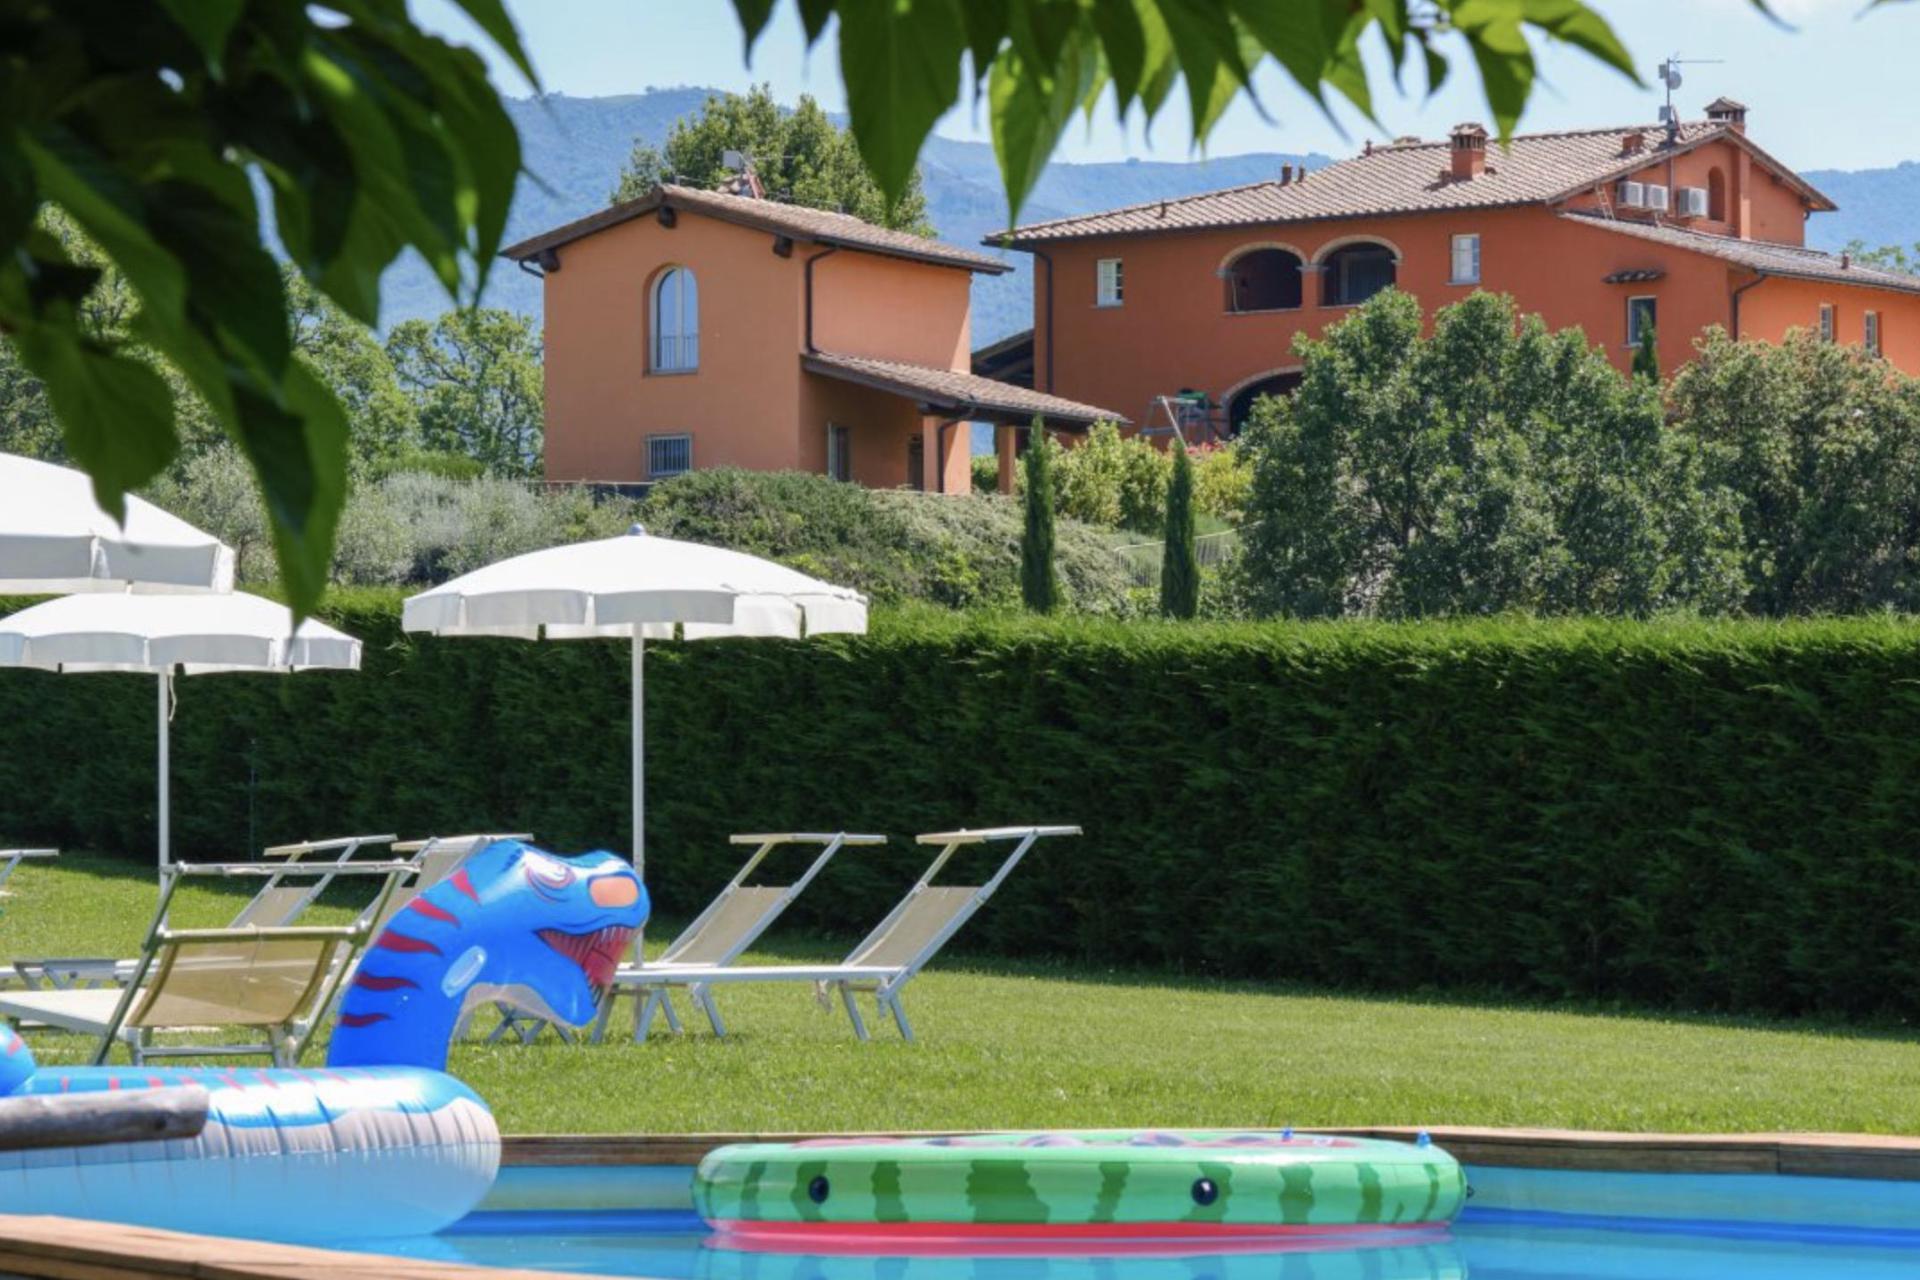 Hospitable agriturismo ideal for families